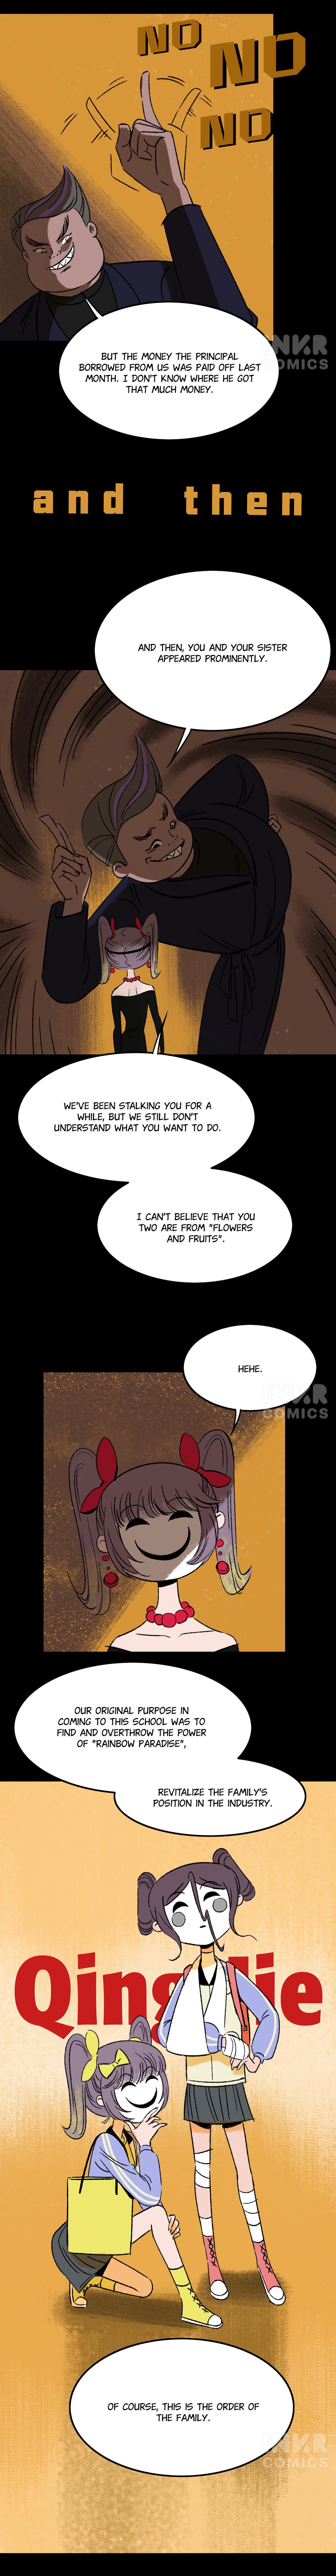 Mysterious Twins - Page 2